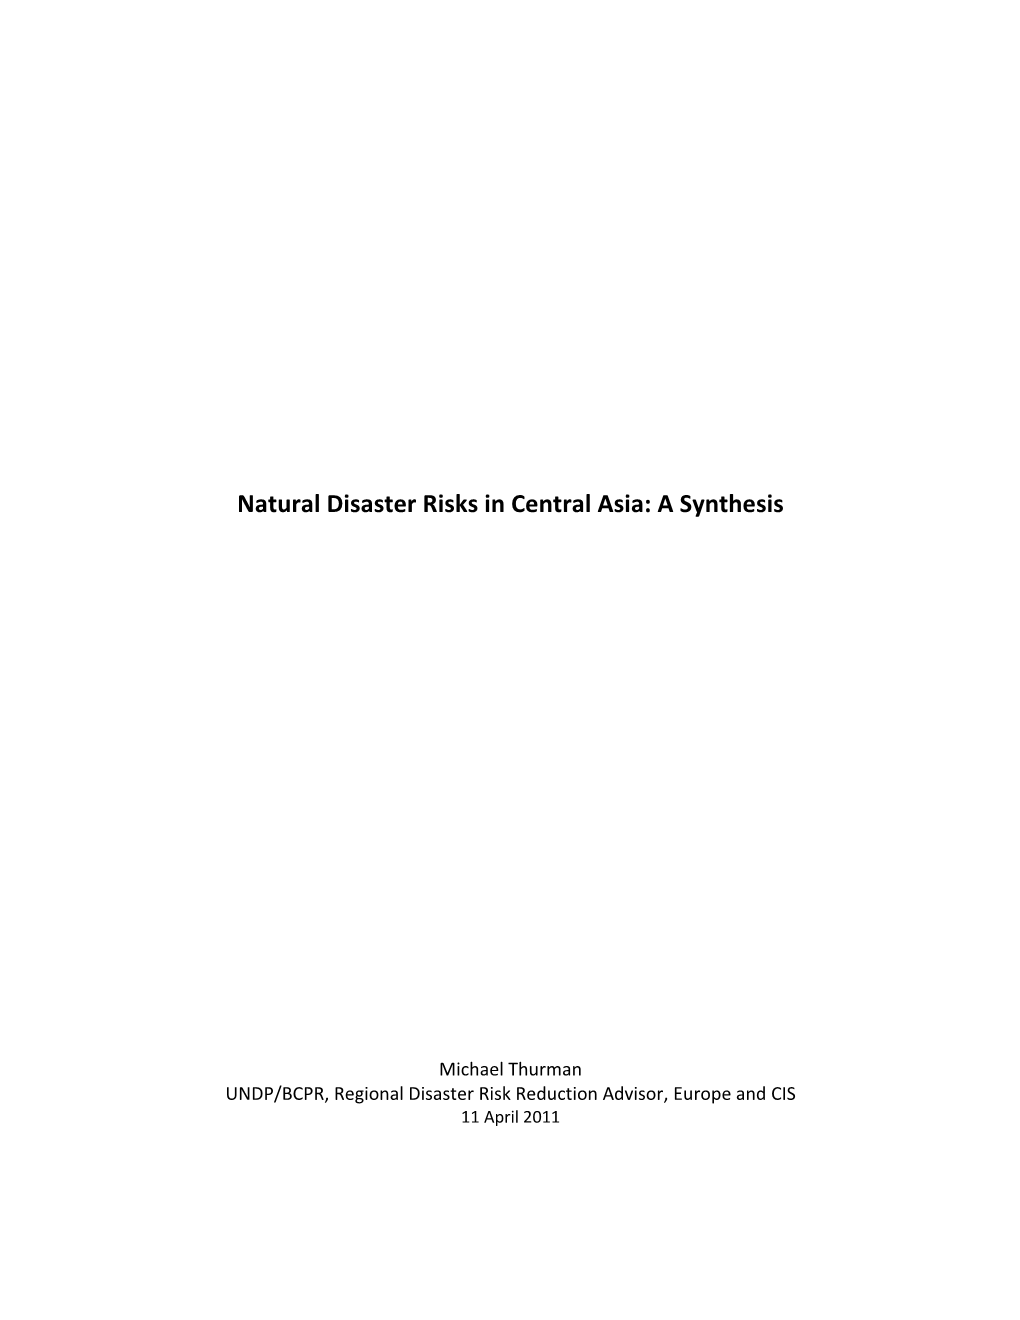 Natural Disaster Risks in Central Asia: a Synthesis